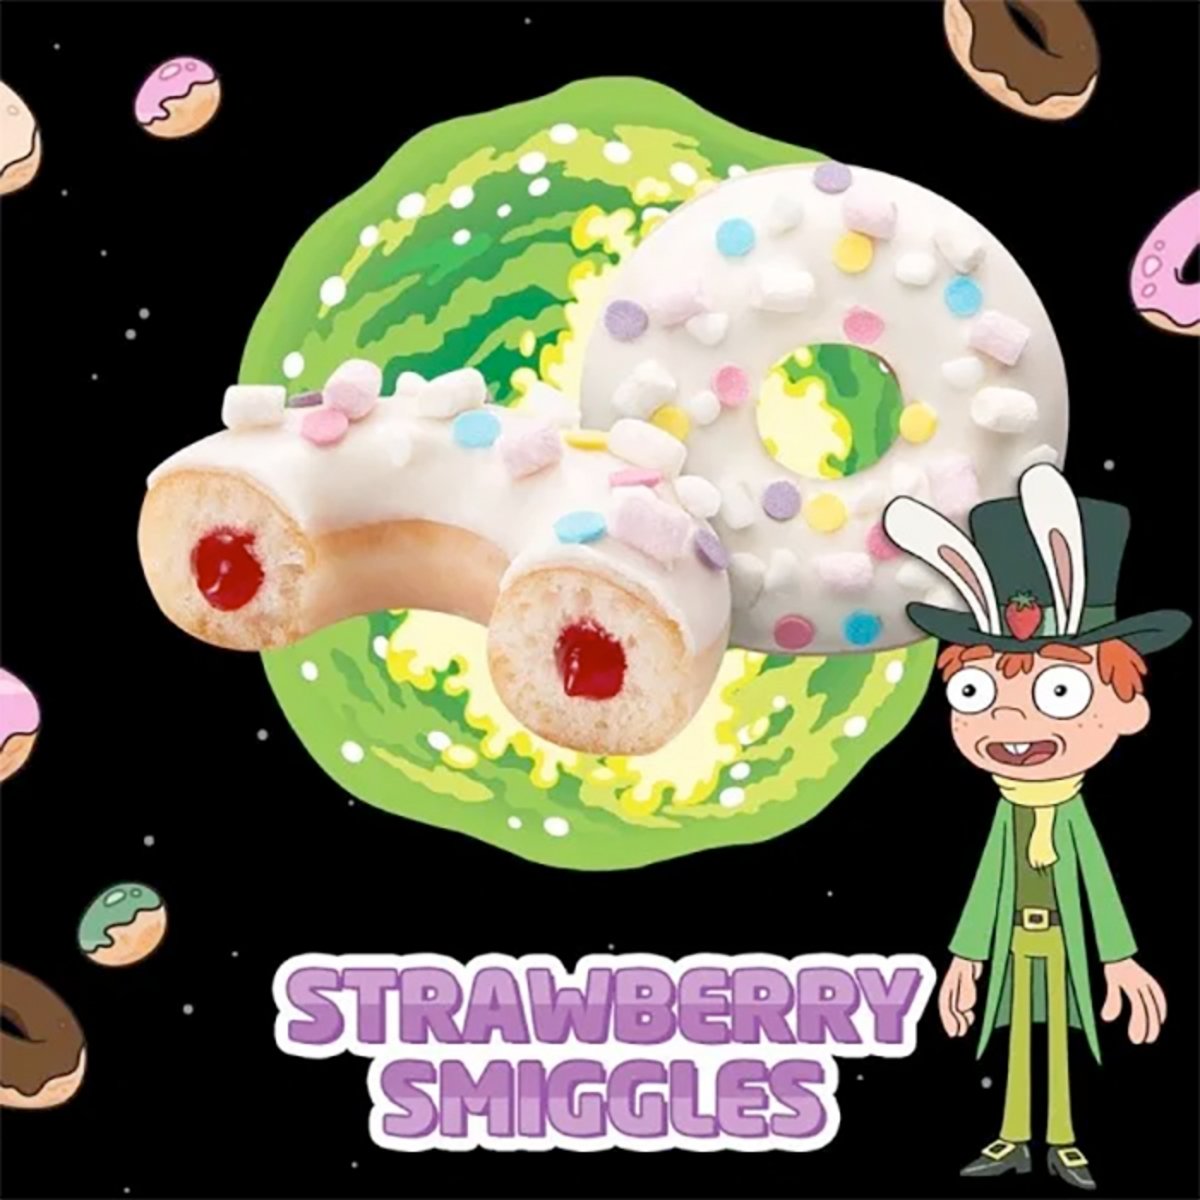 Donuts Rick y Morty Strawberry Smiggles